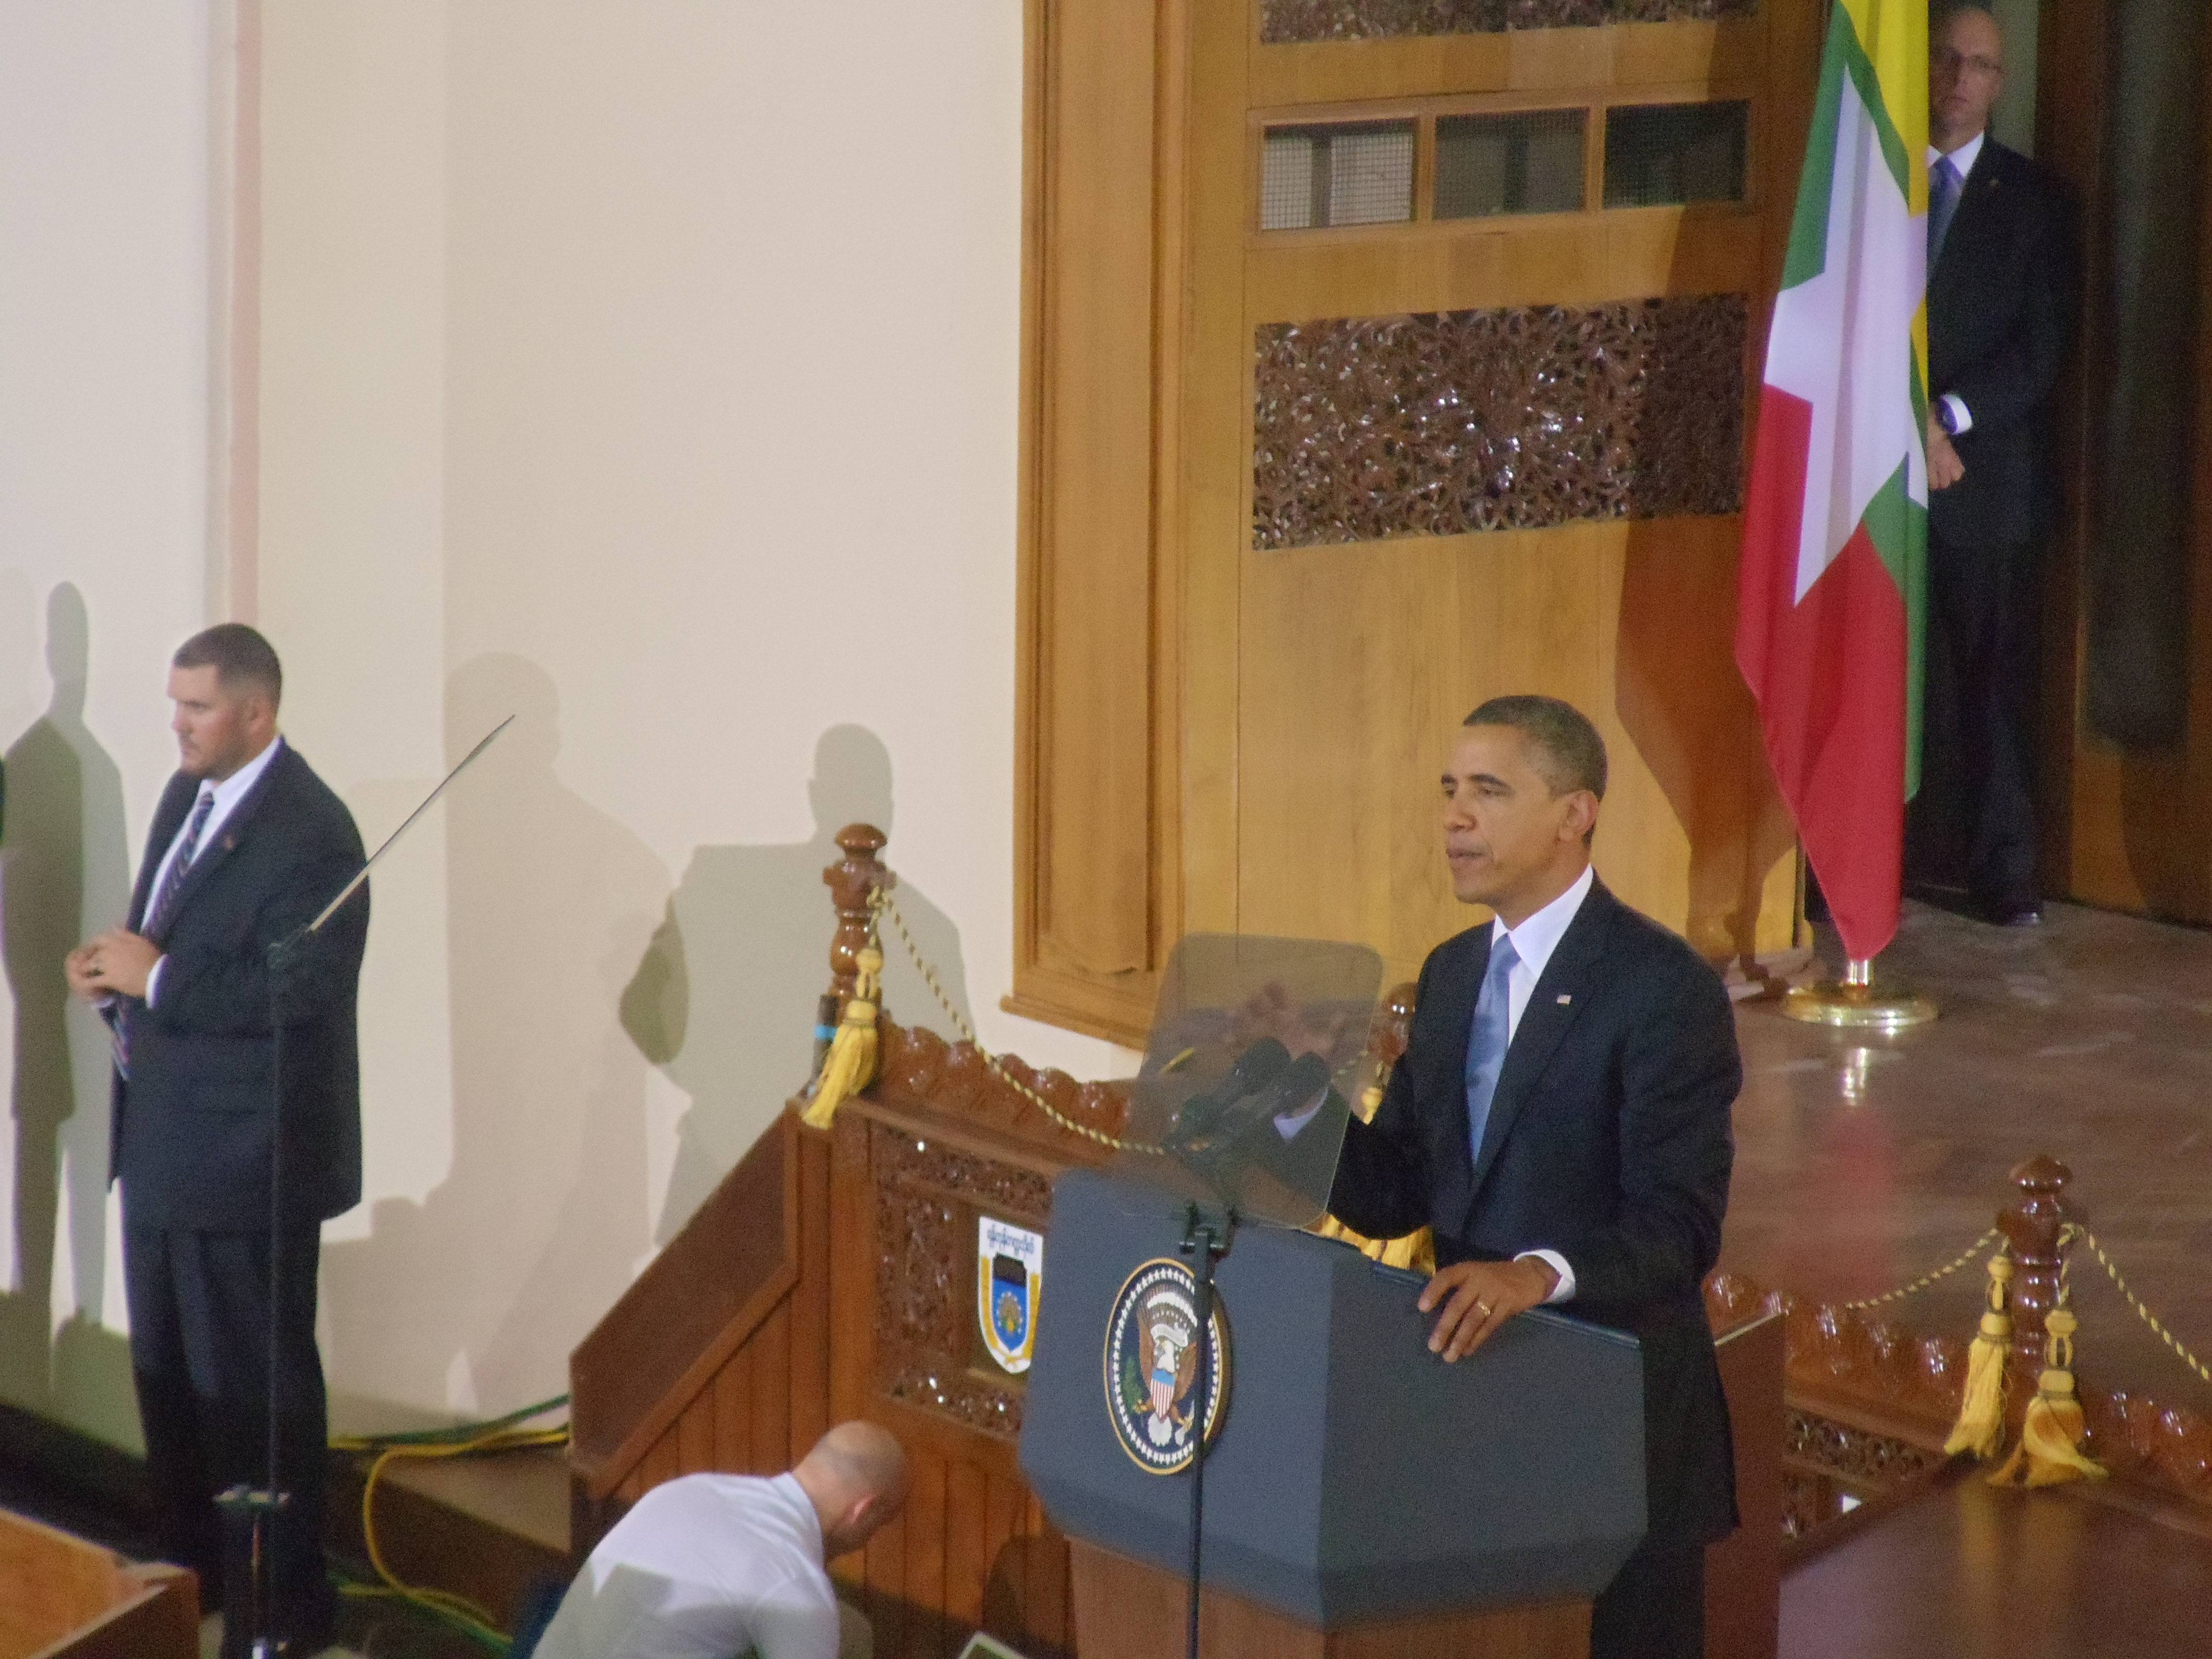 Remarks by President Obama at the University of Yangon